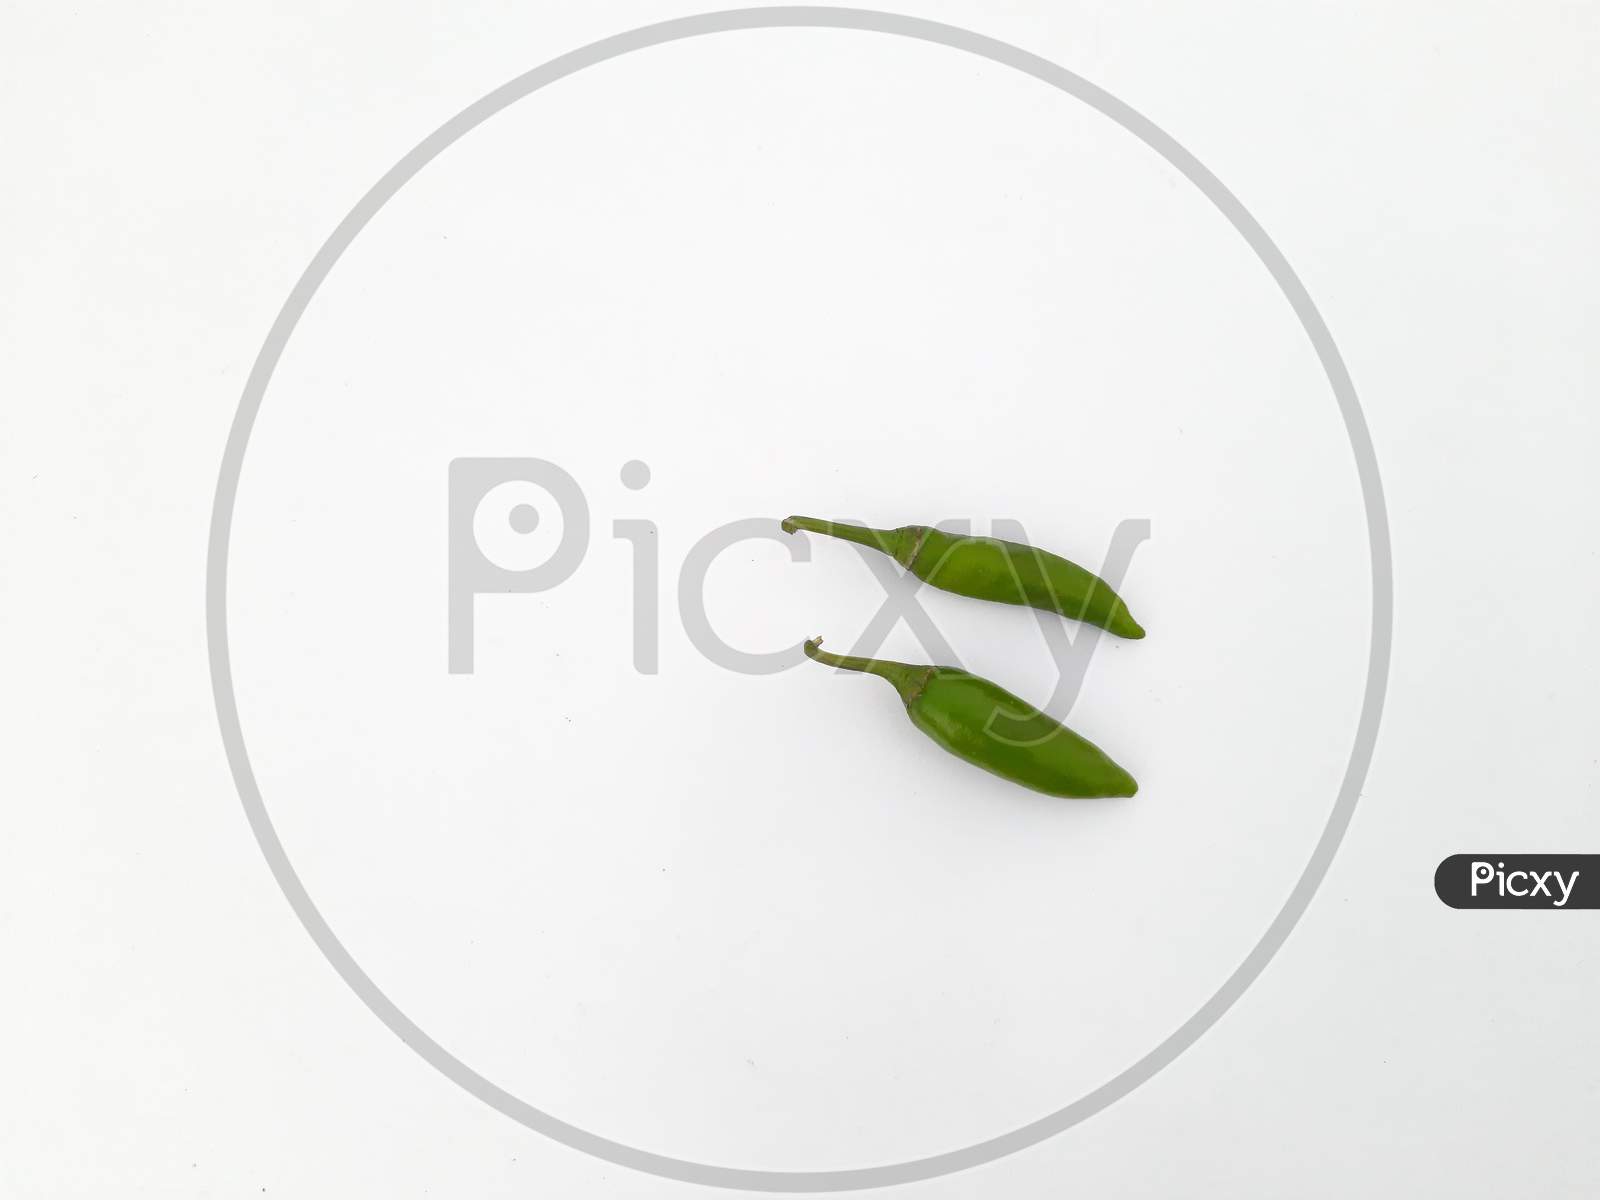 Two Chilies image in white Background, Chilie image, Selective Focus